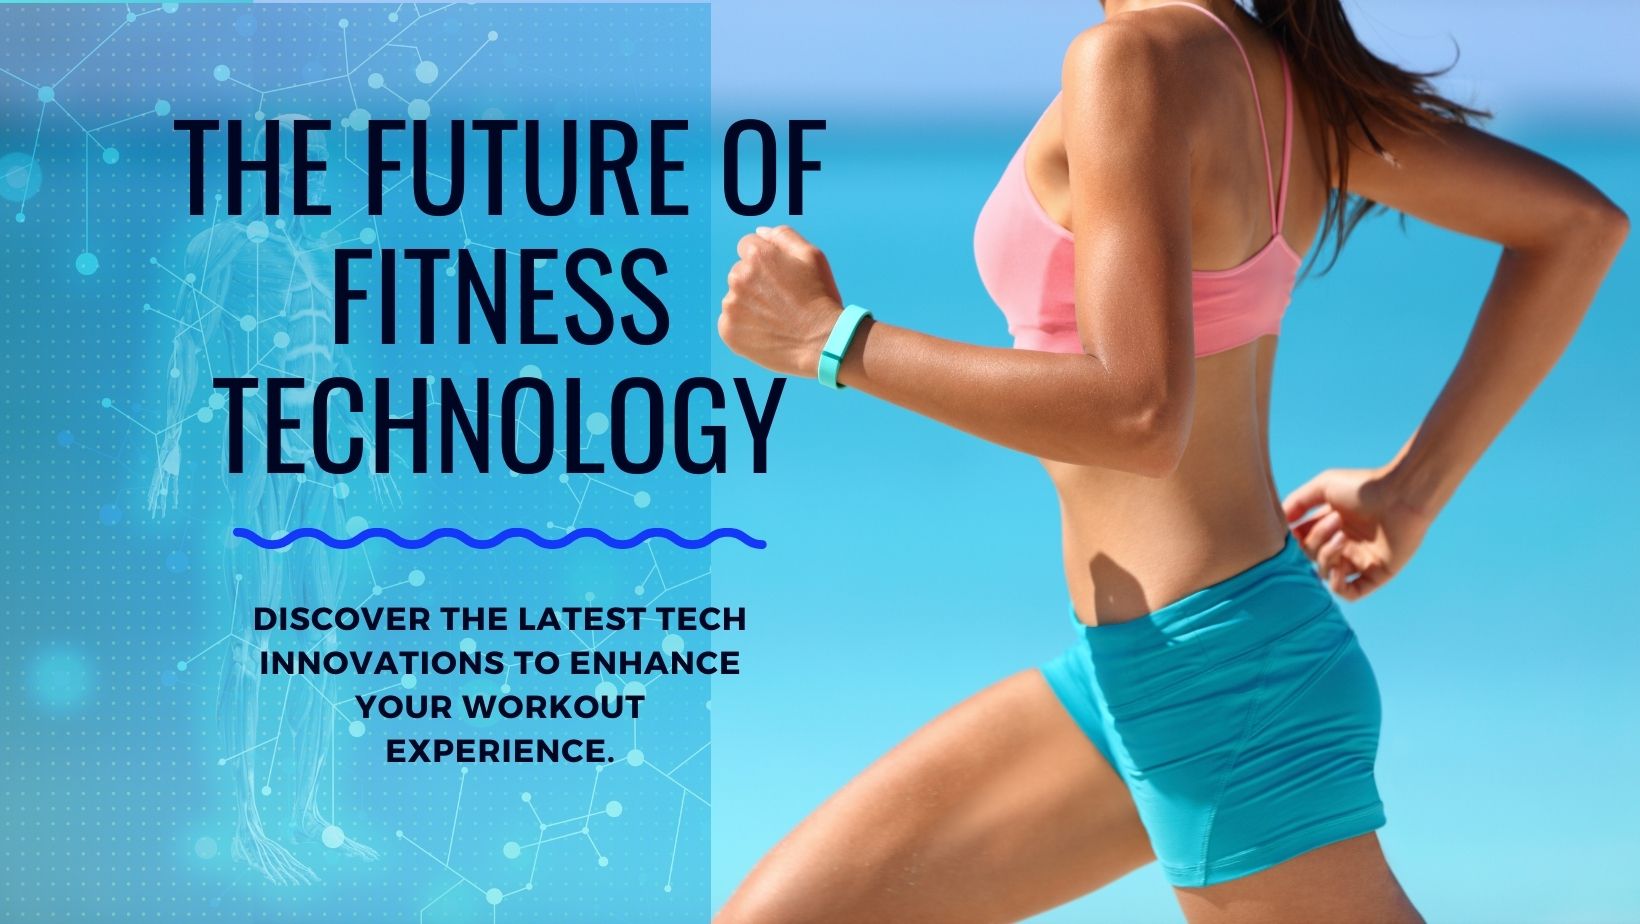 TechFit: Powering Everyday Wellness with Cutting-Edge Technology